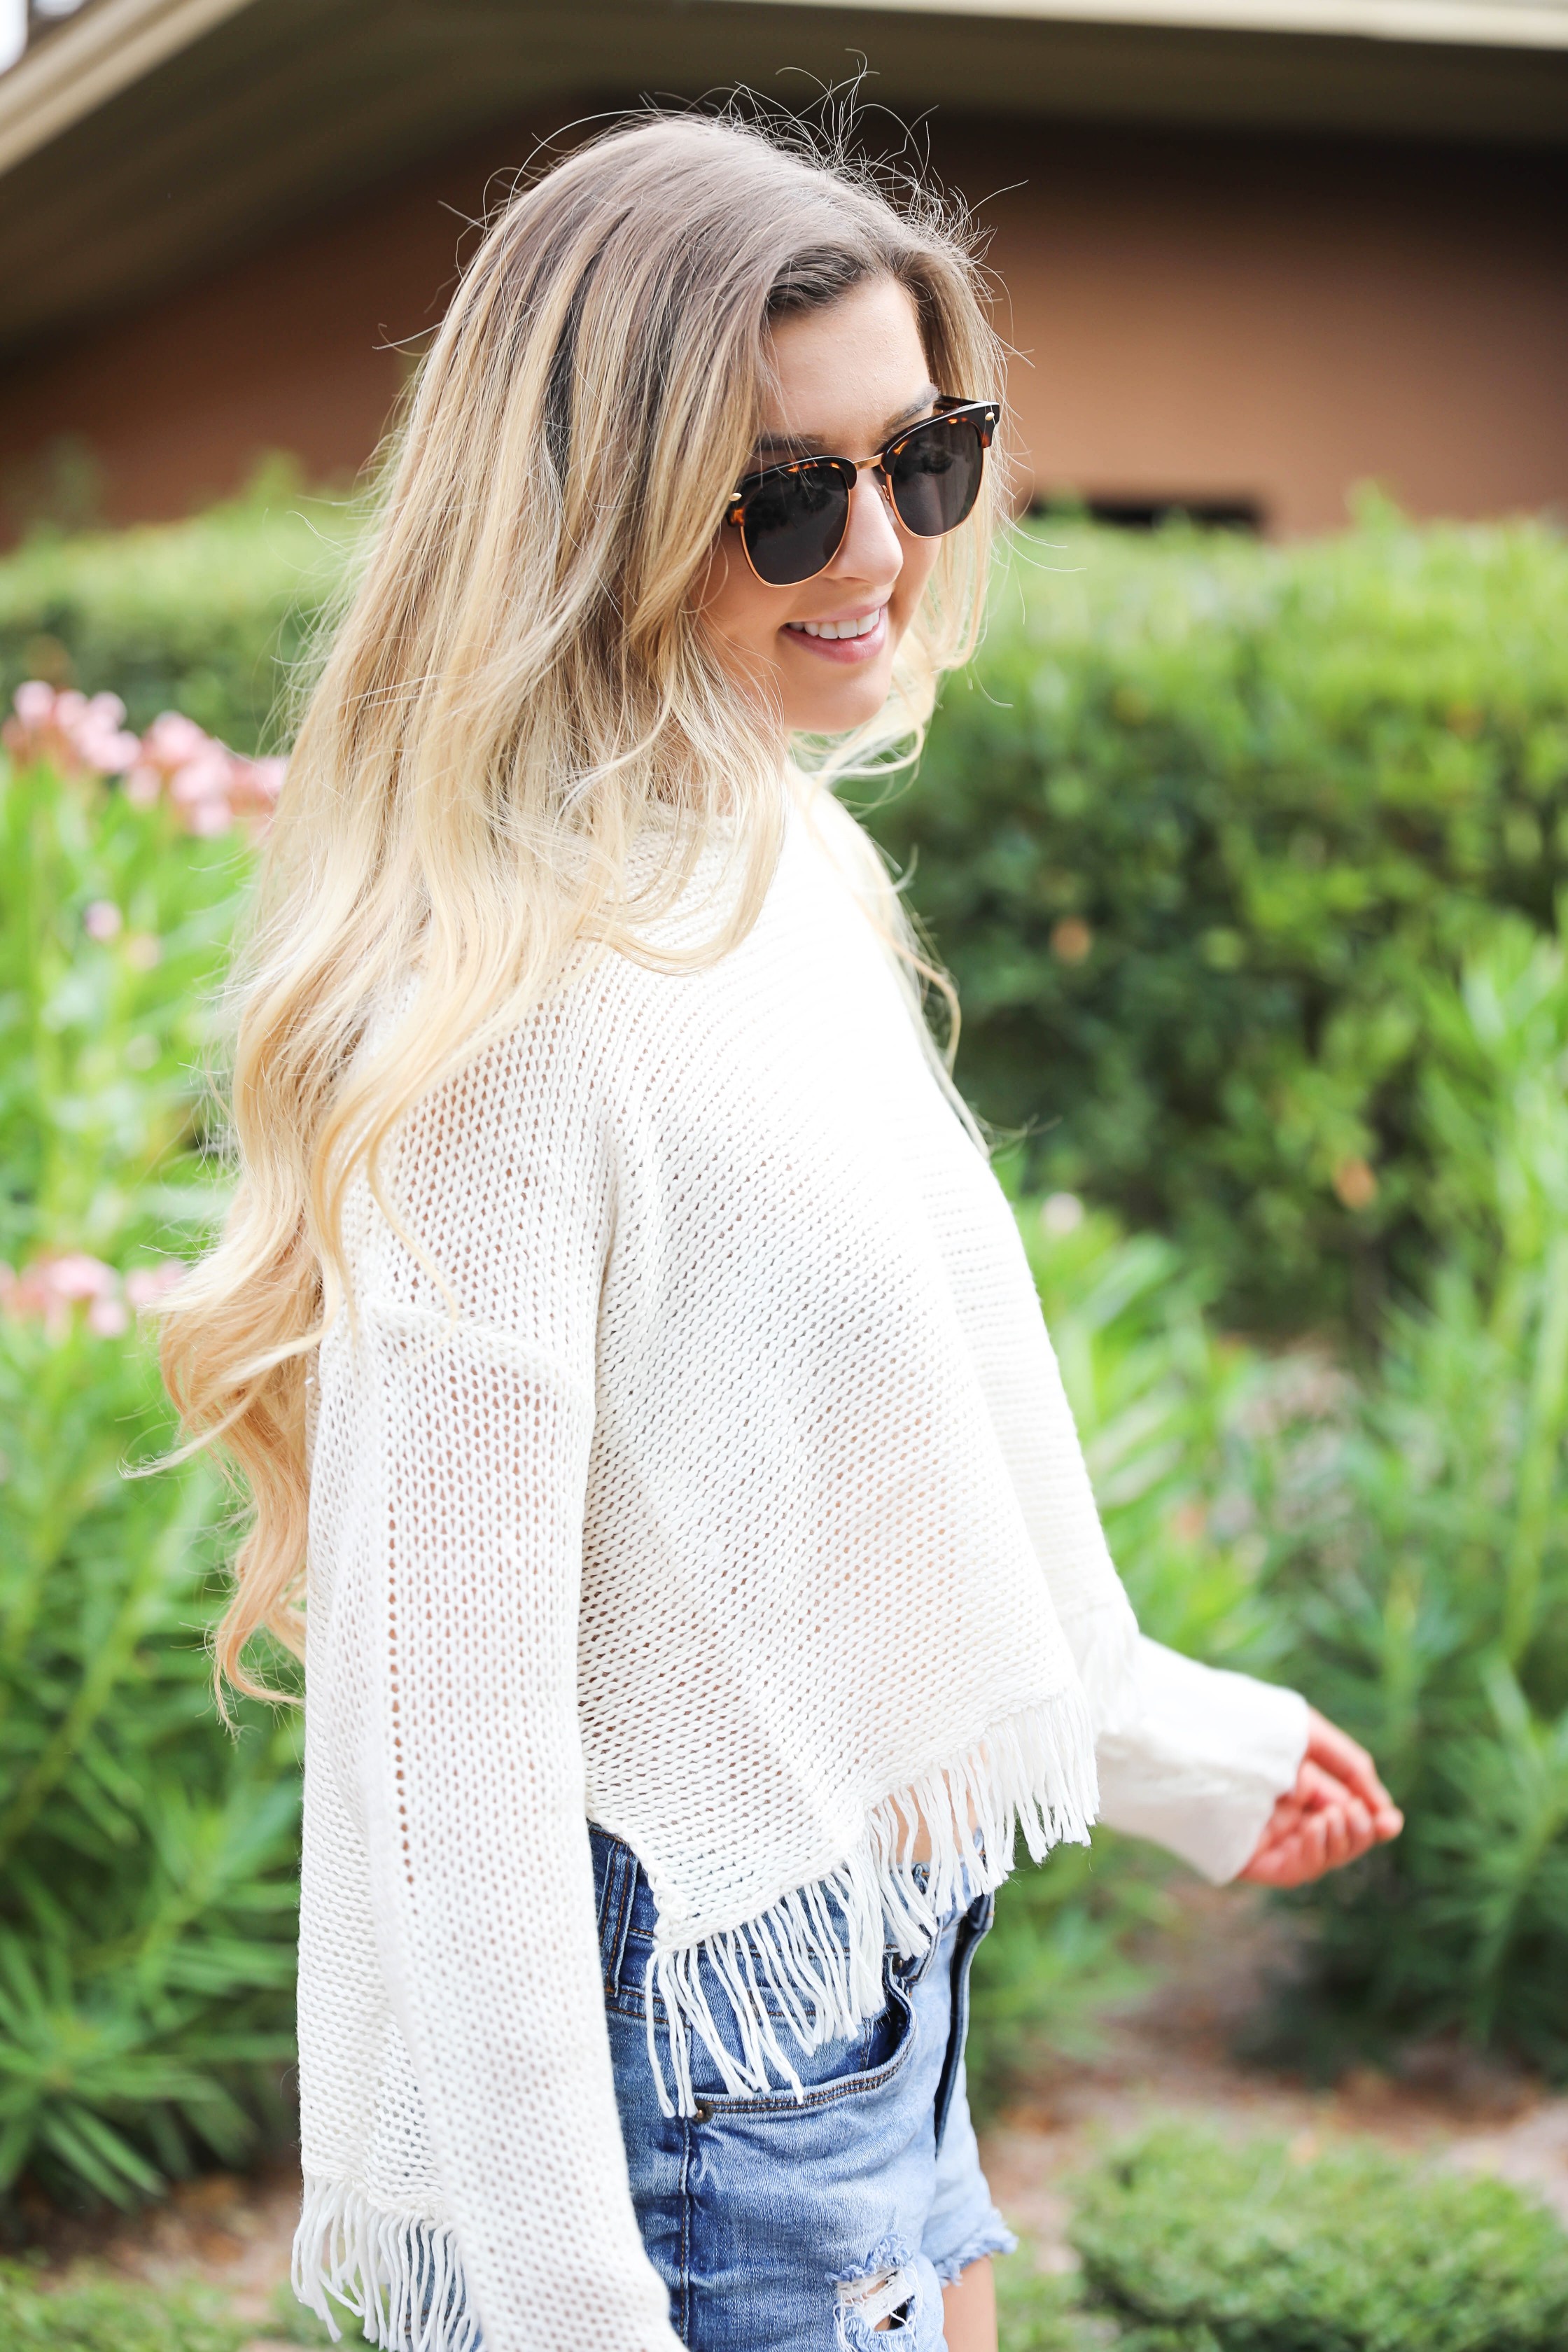 Fringe sweater from Show Me Your Mumu paired with my favorite catus espadrilles shoes! Perfect spring bring break outfit idea! Totally summer vibes on the blog right now! Details on fashion blogger daily dose of charm by lauren lindmark